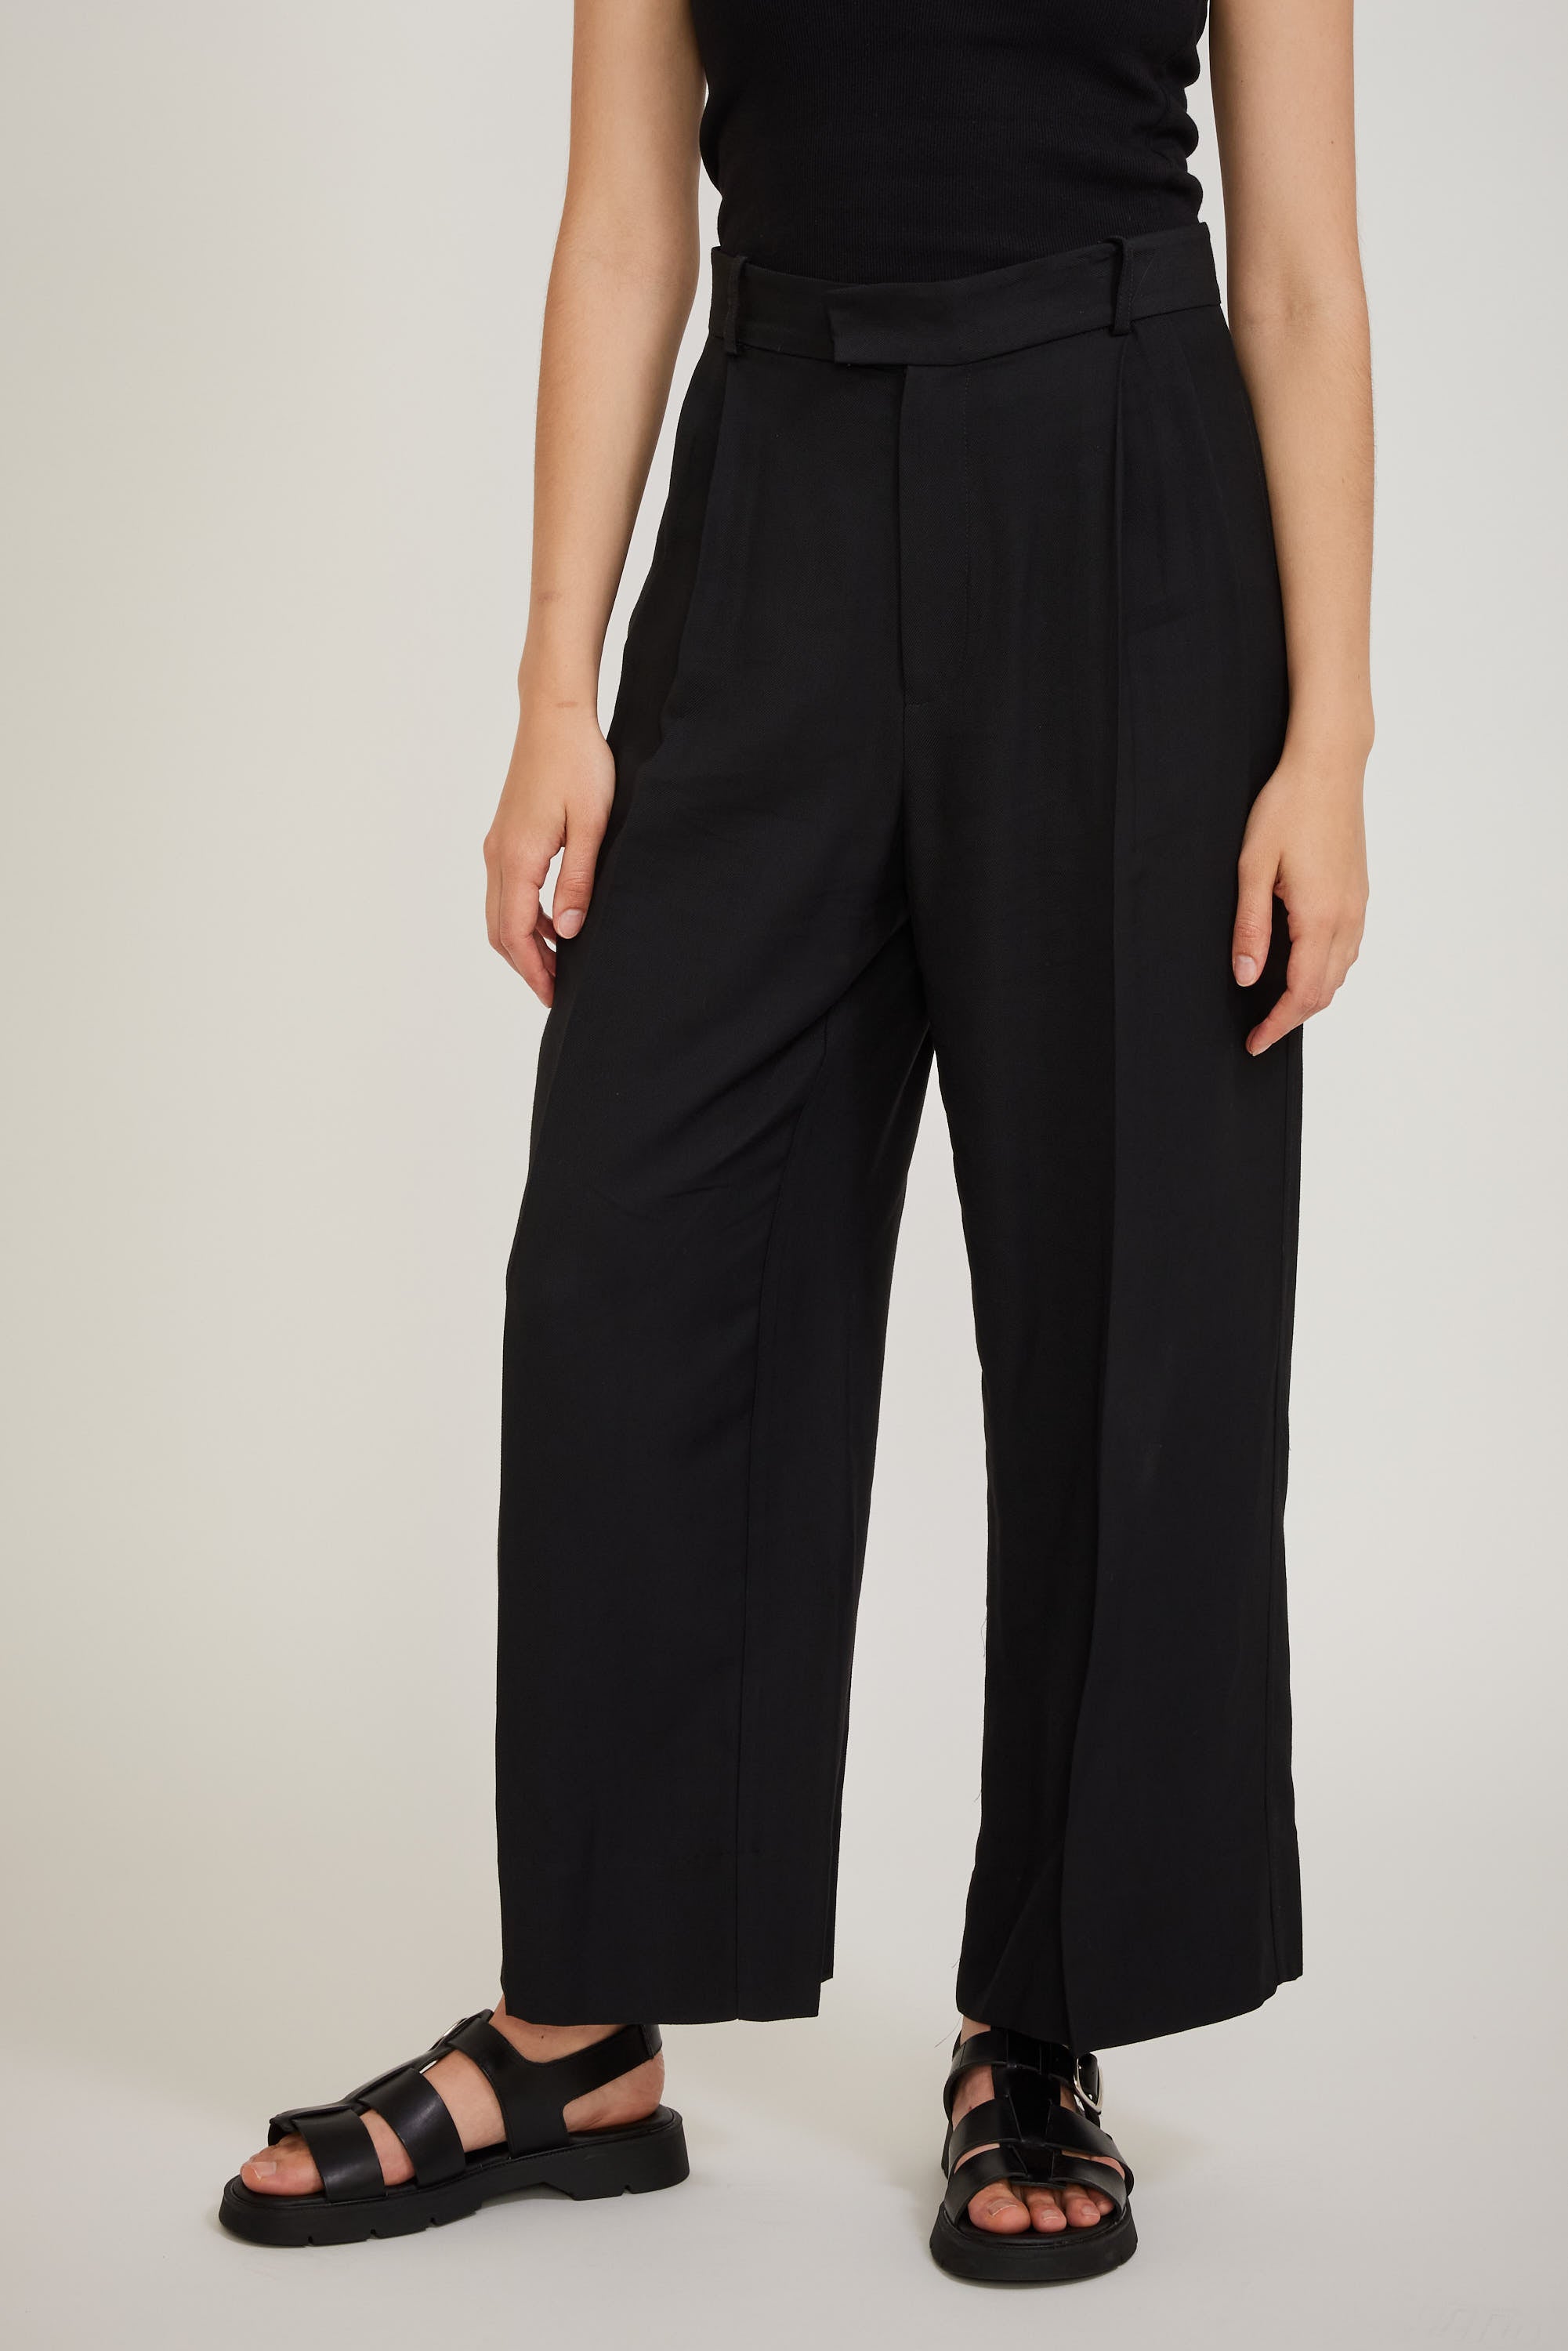 Topshop Unique Tailored Relaxed Wide Leg Slouch Pants in Black  Lyst